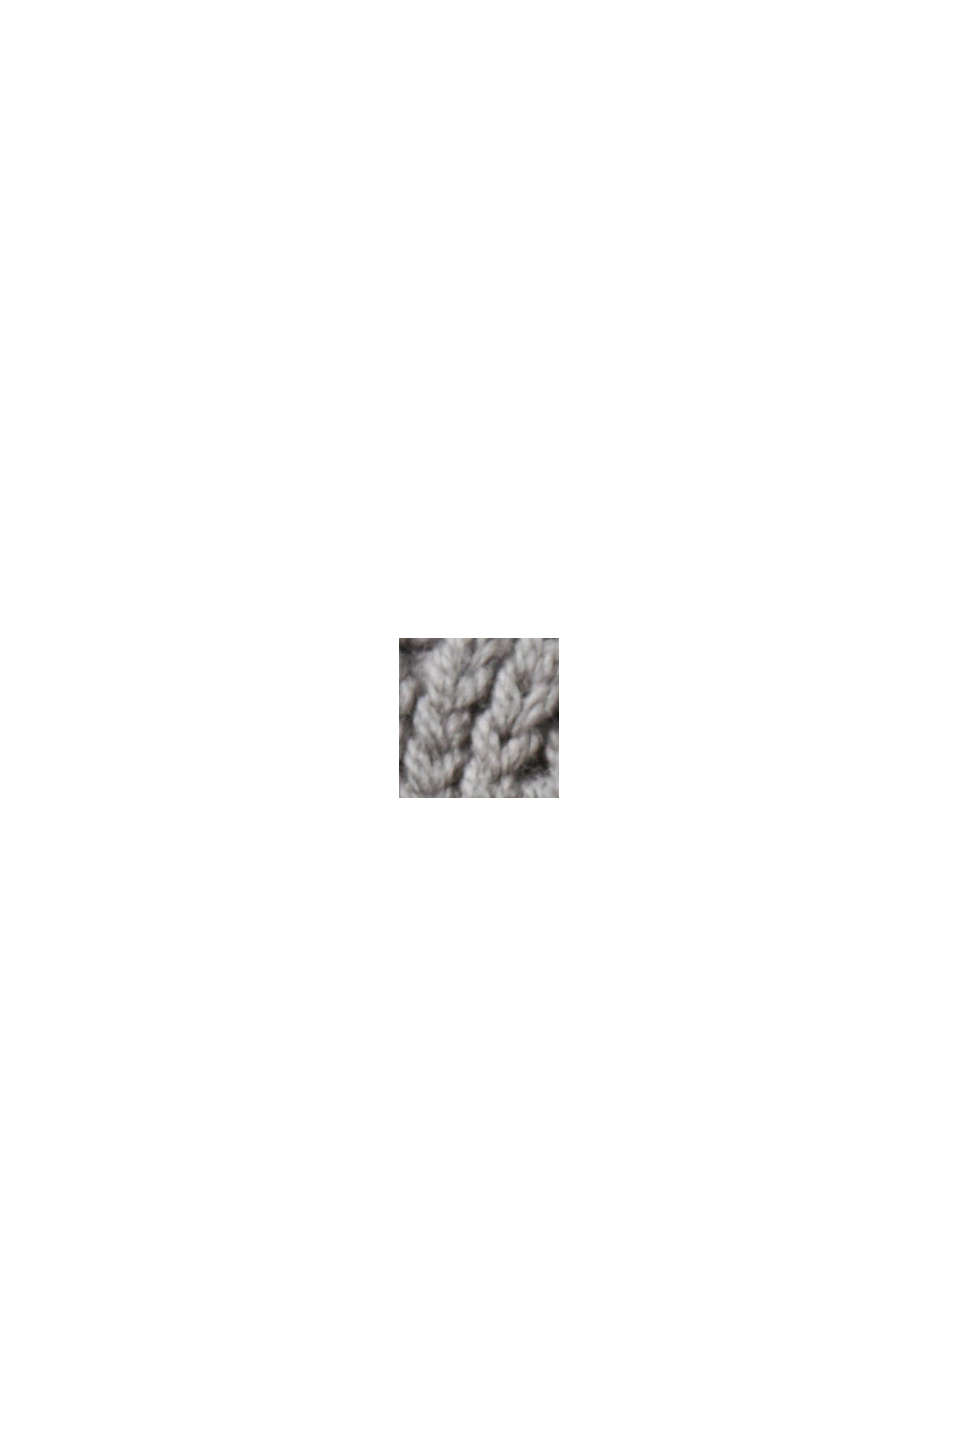 Chunky cable knit jumper, MEDIUM GREY, swatch